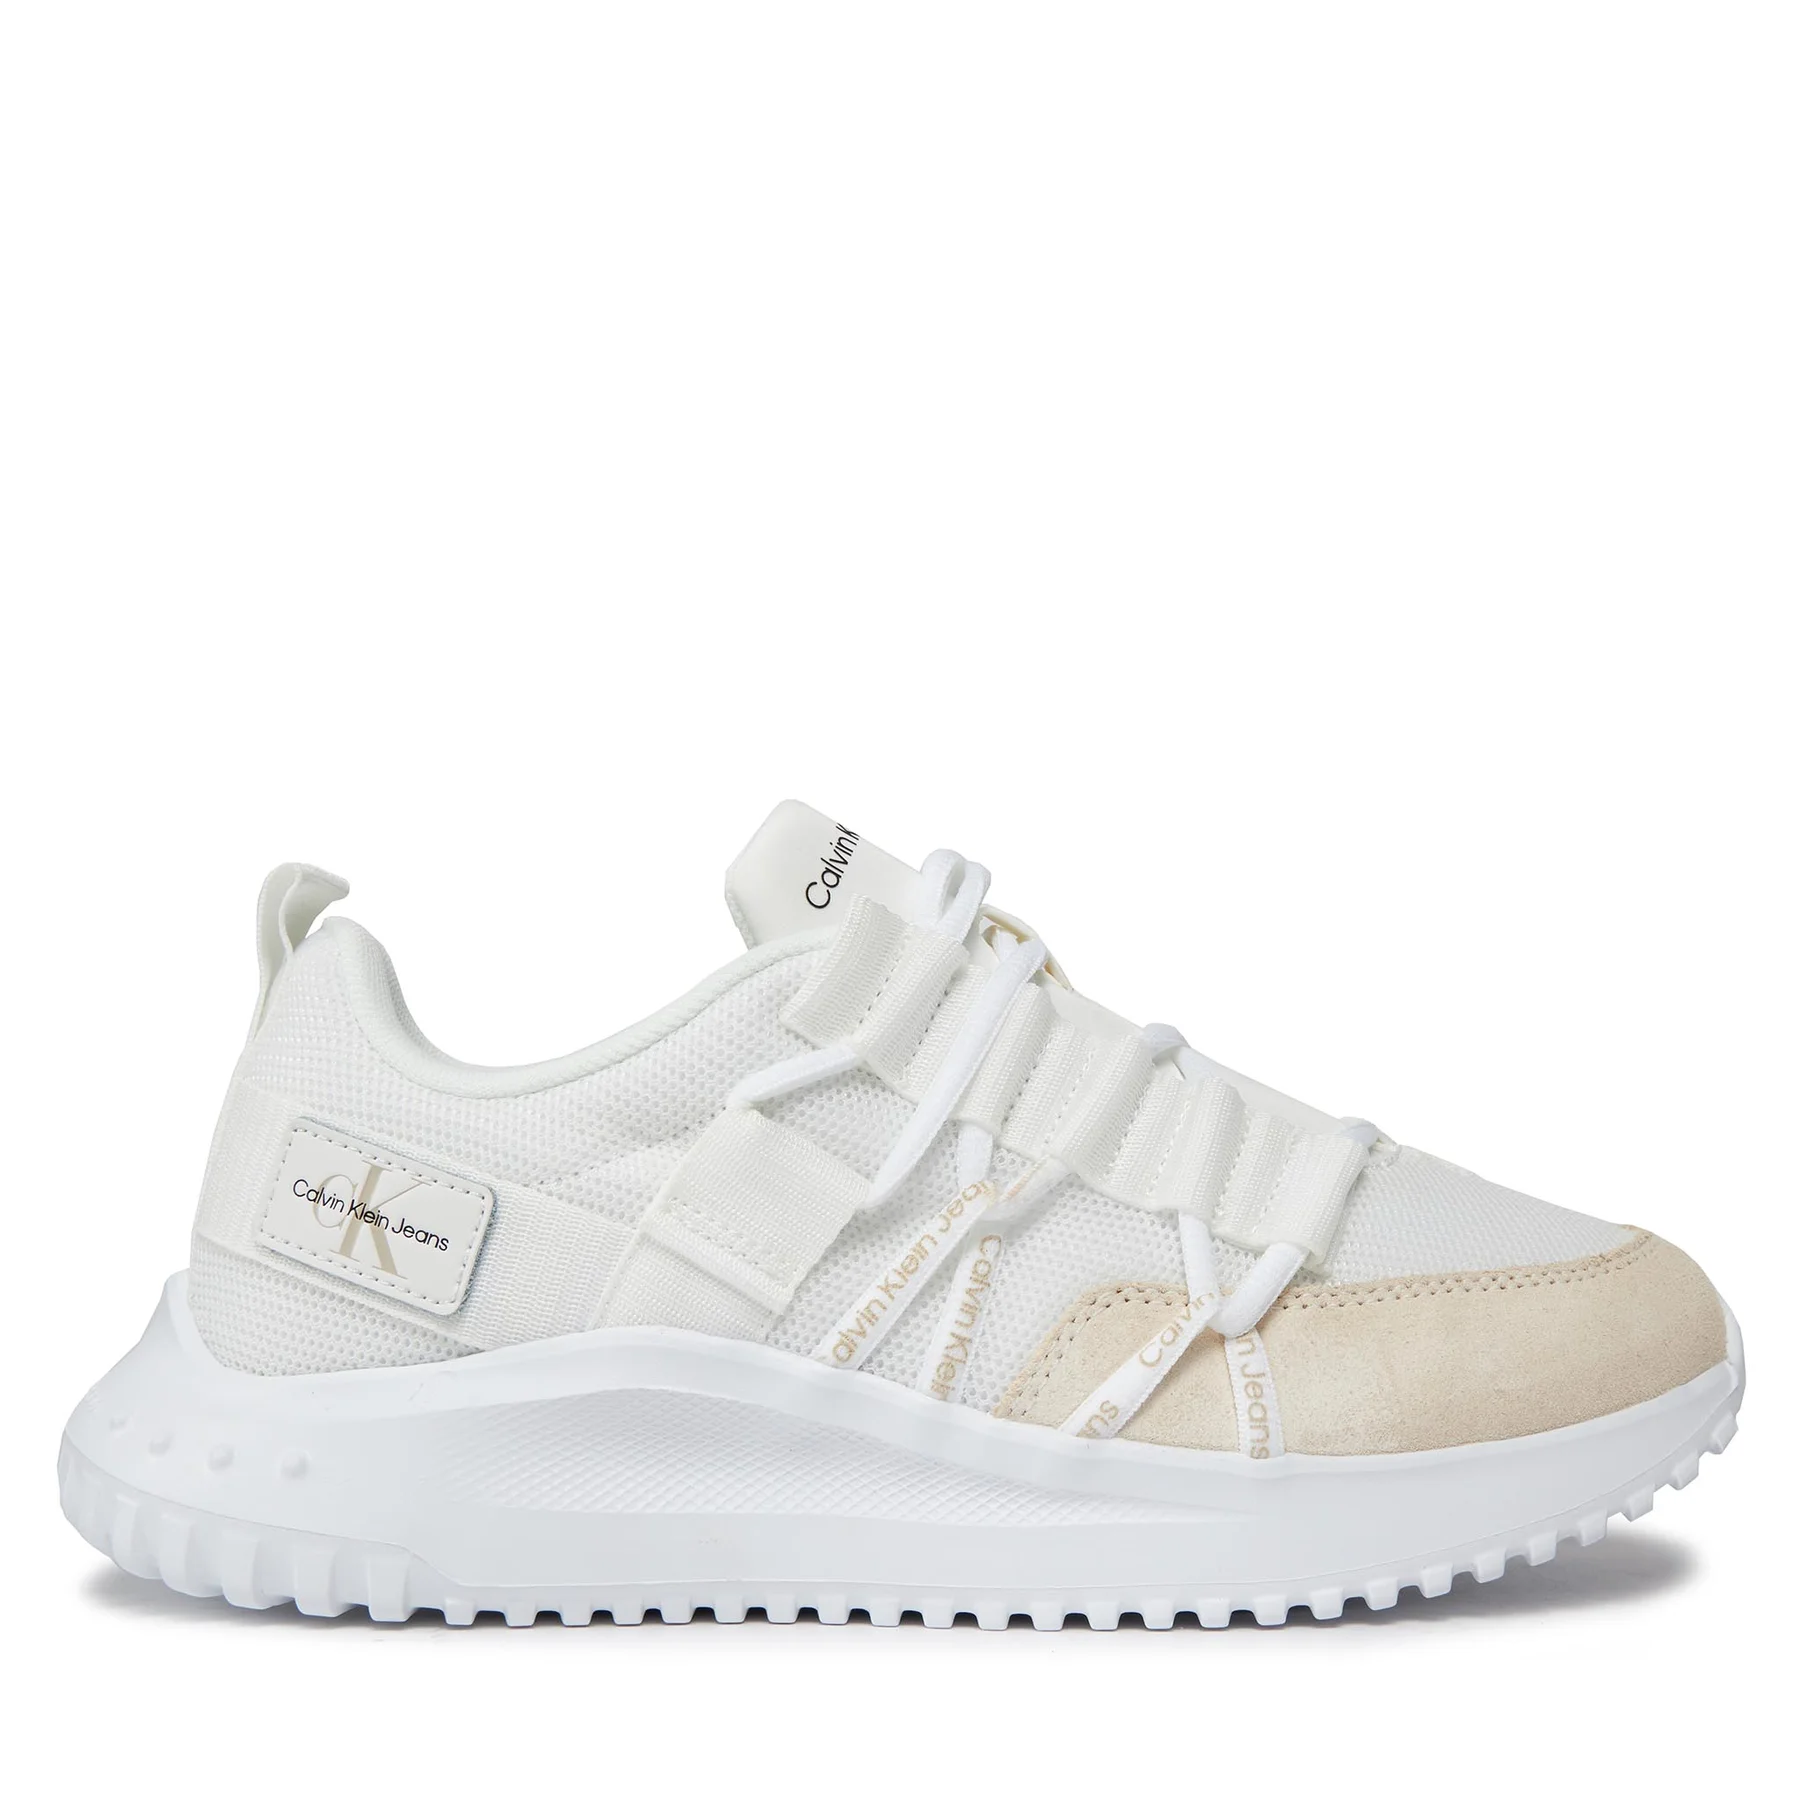 sneakers-calvin-klein-jeans-eva-runner-low-lace-mix-ml-fad-yw0yw01319-bright-white-creamy-white-02y-0000303288181 (1)